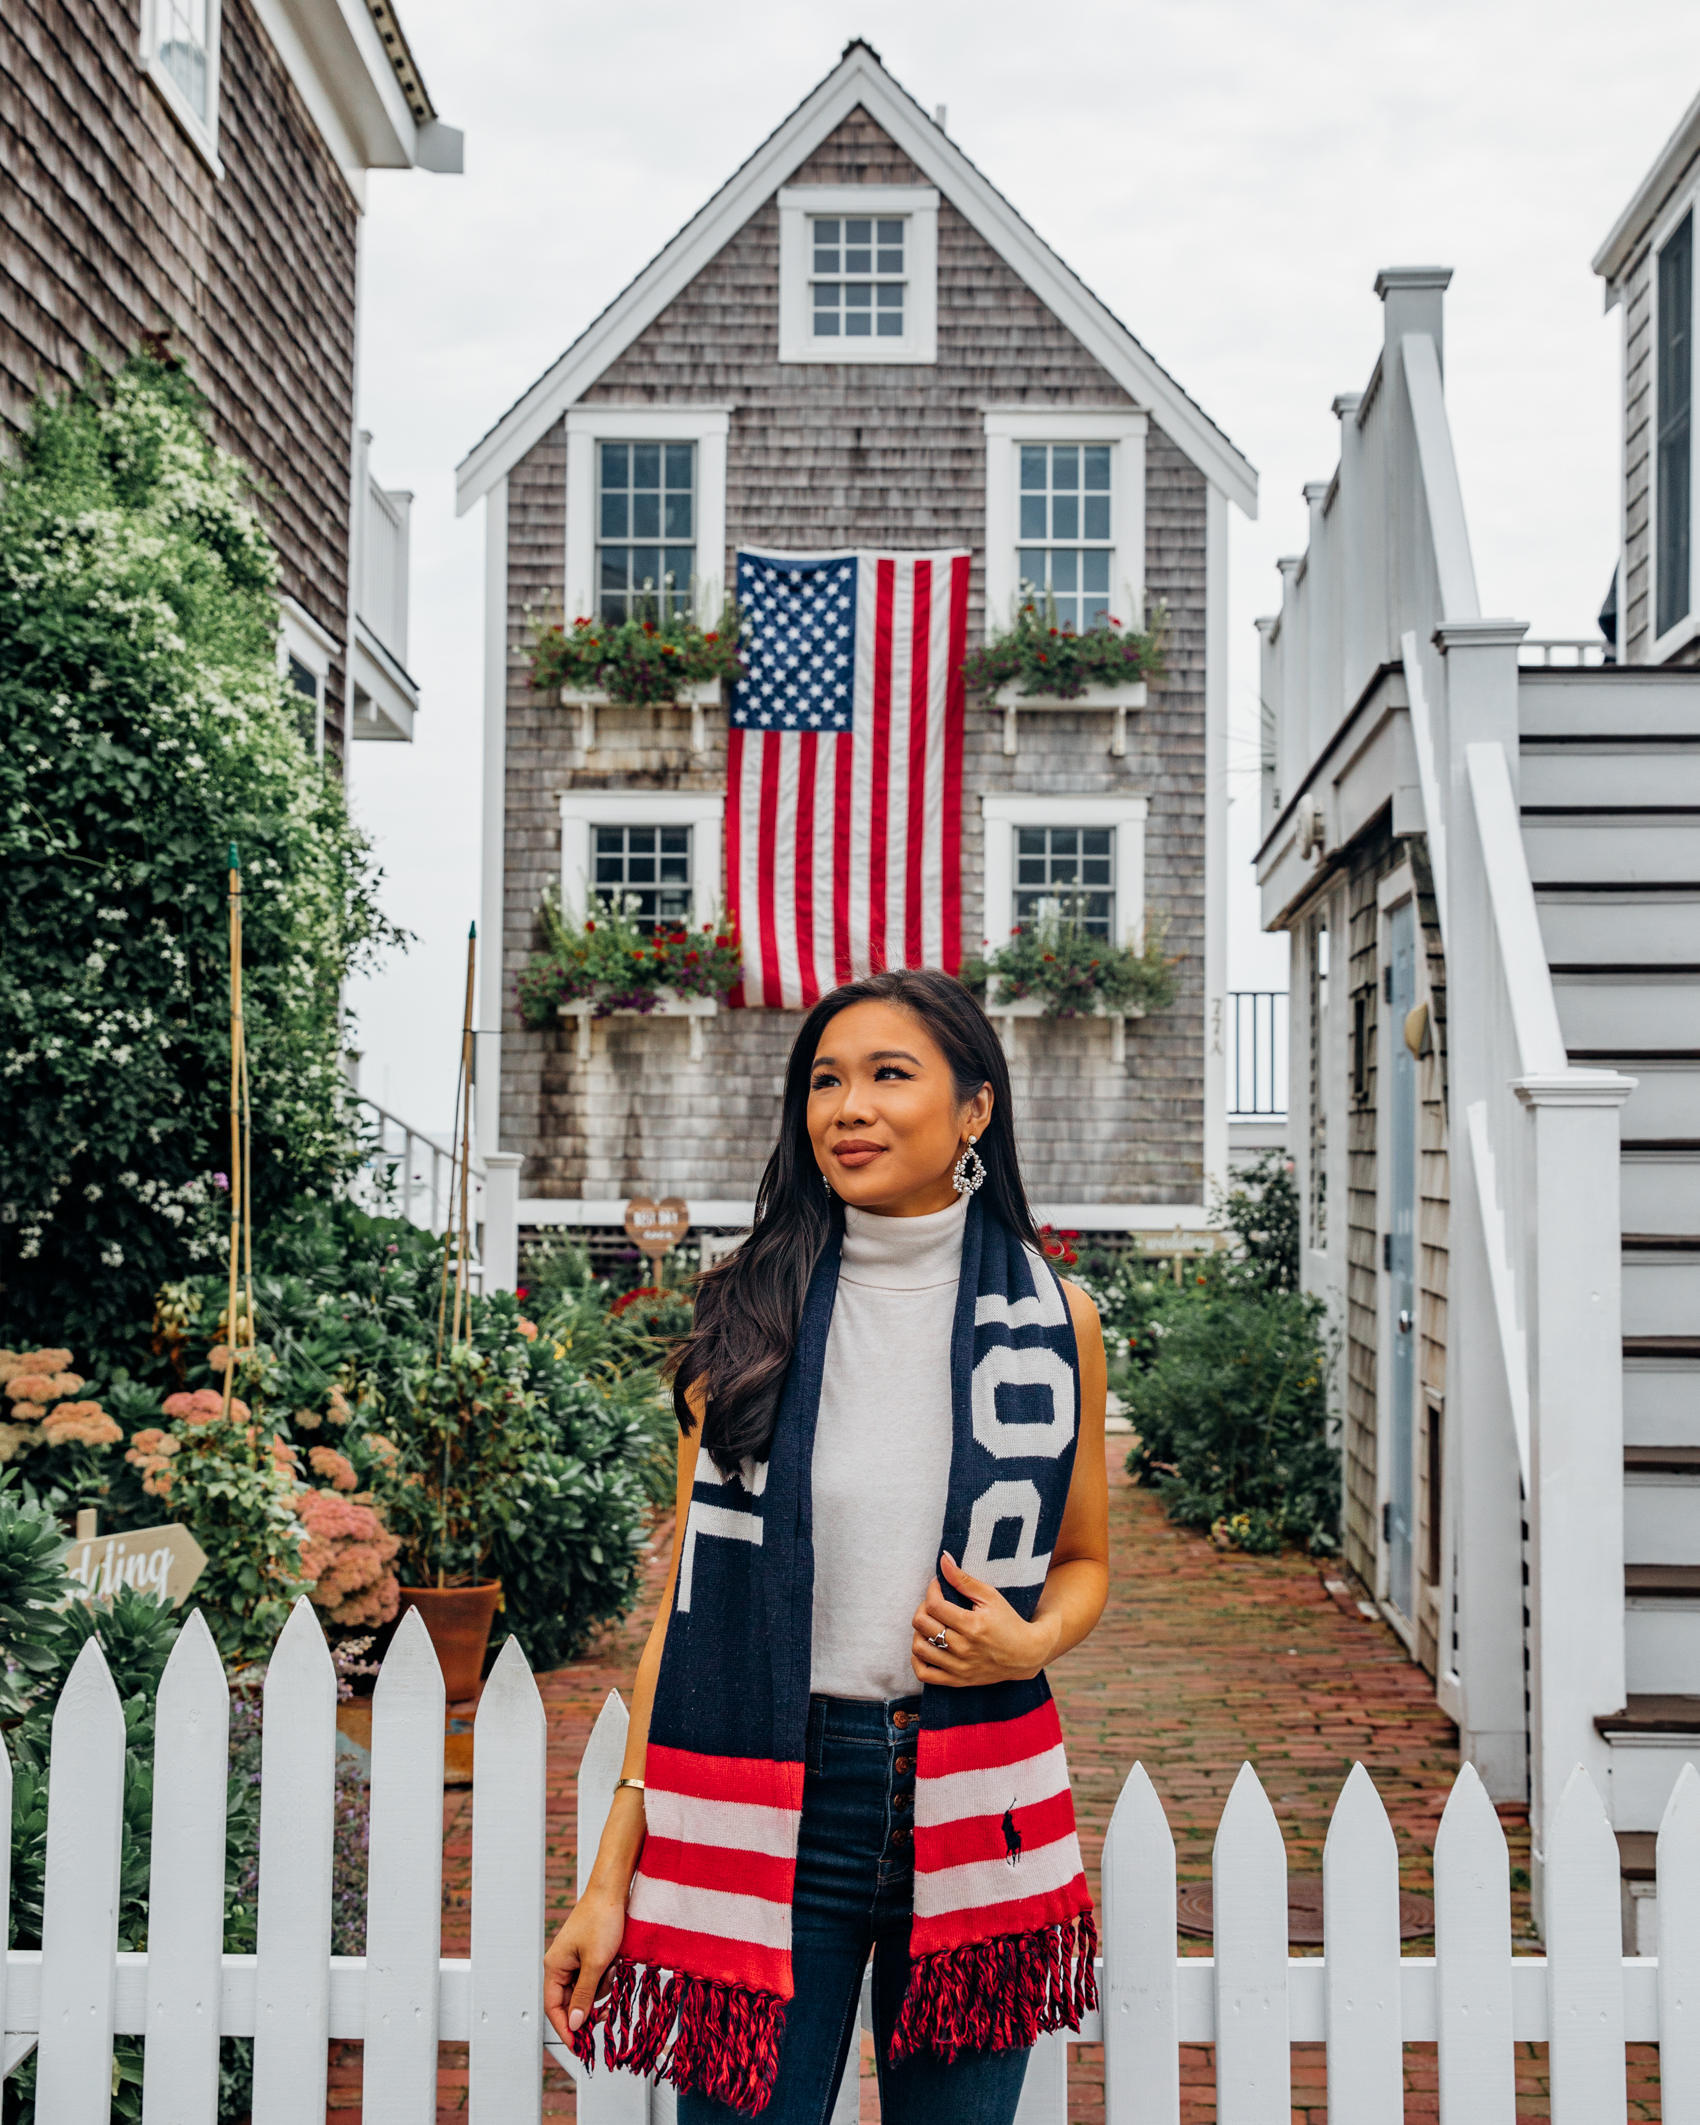 Five things to do in Provincetown, Massachusetts - visit the house with a huge American flag